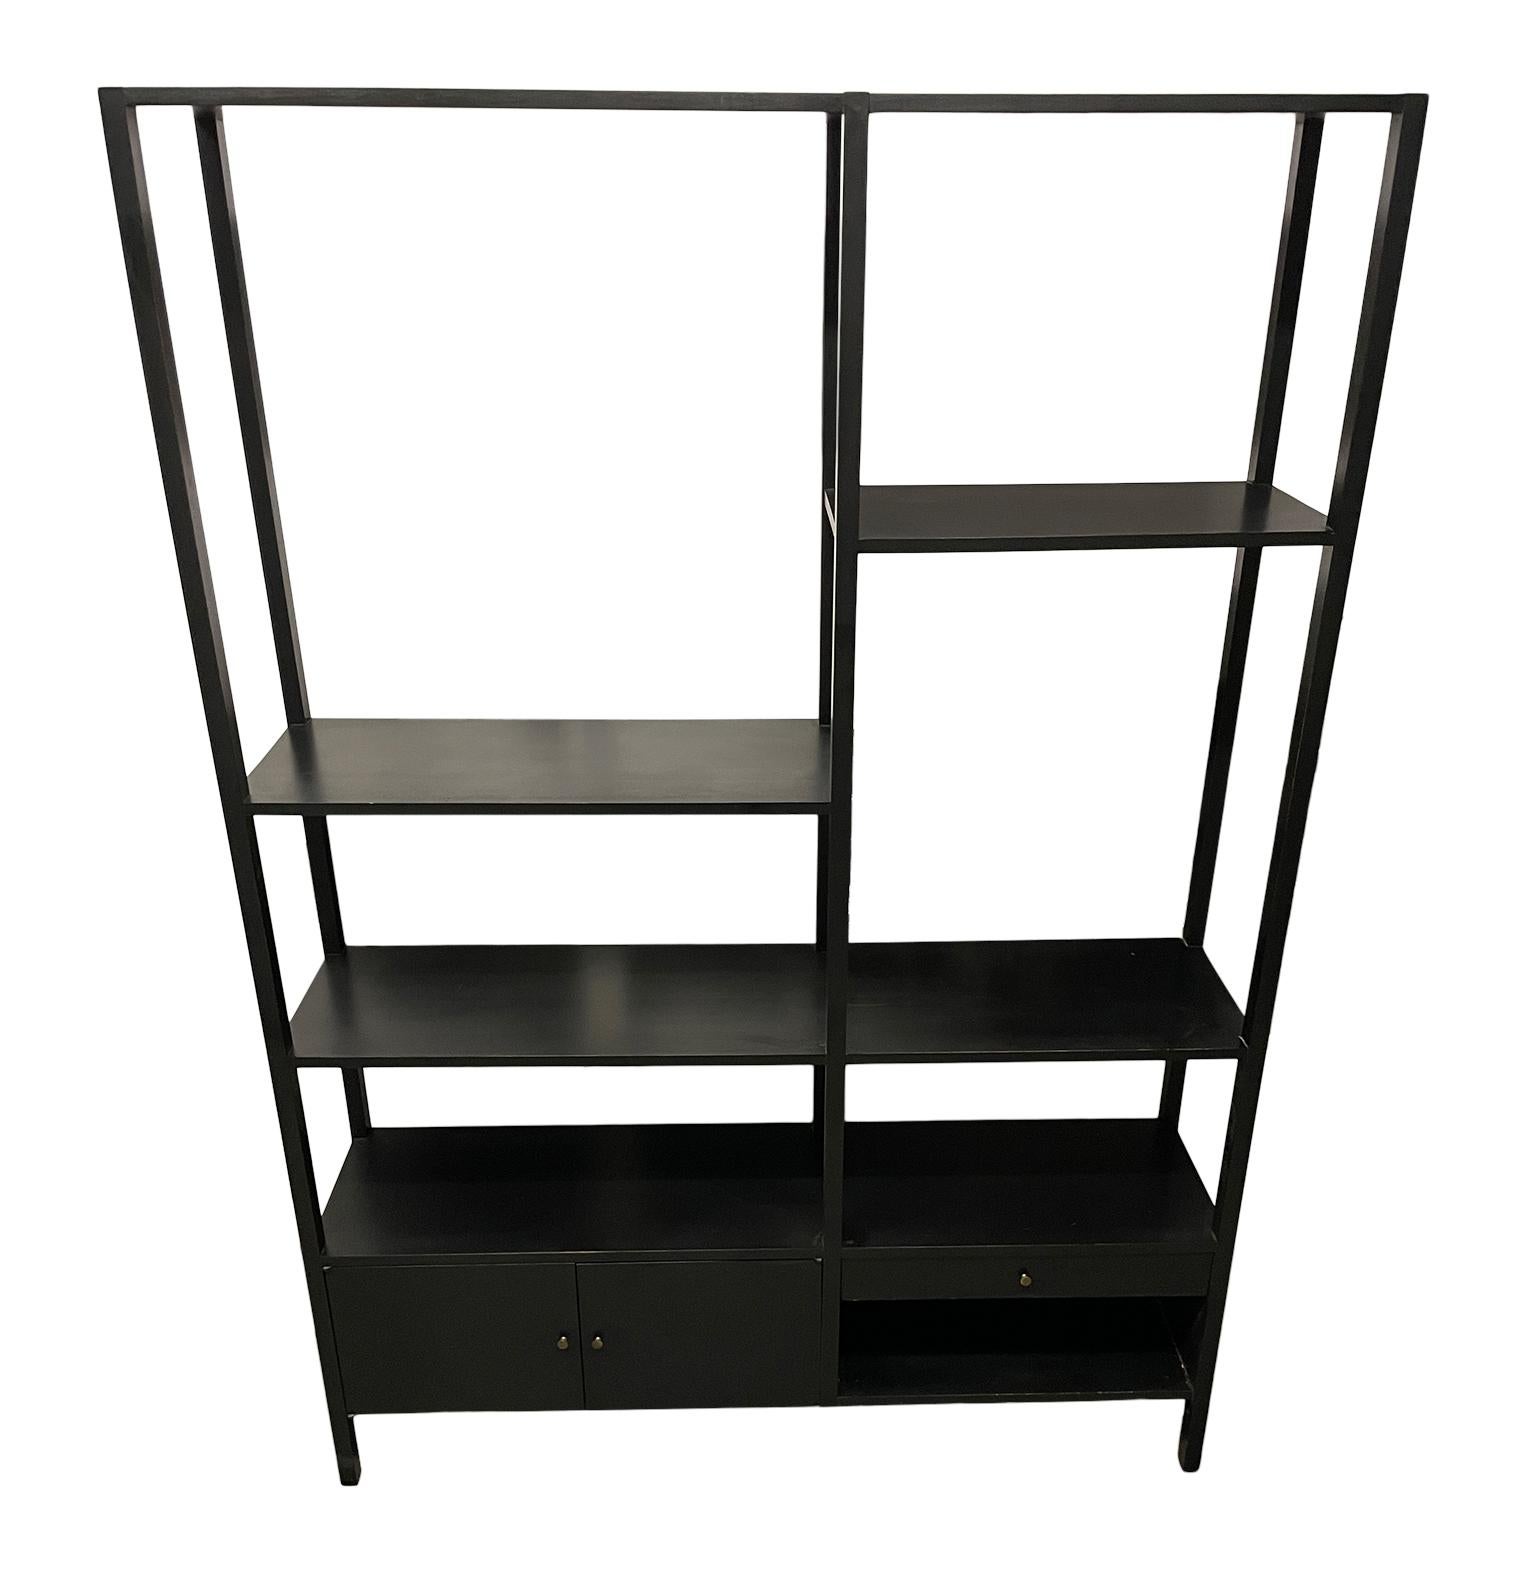 Midcentury American designer Paul McCobb freestanding black lacquer room divider for Planner Group. Unit black lacquer finish. This unit is in Beautiful vintage condition - Has lower cabinet and (2) lower drawers - all maple with an original black